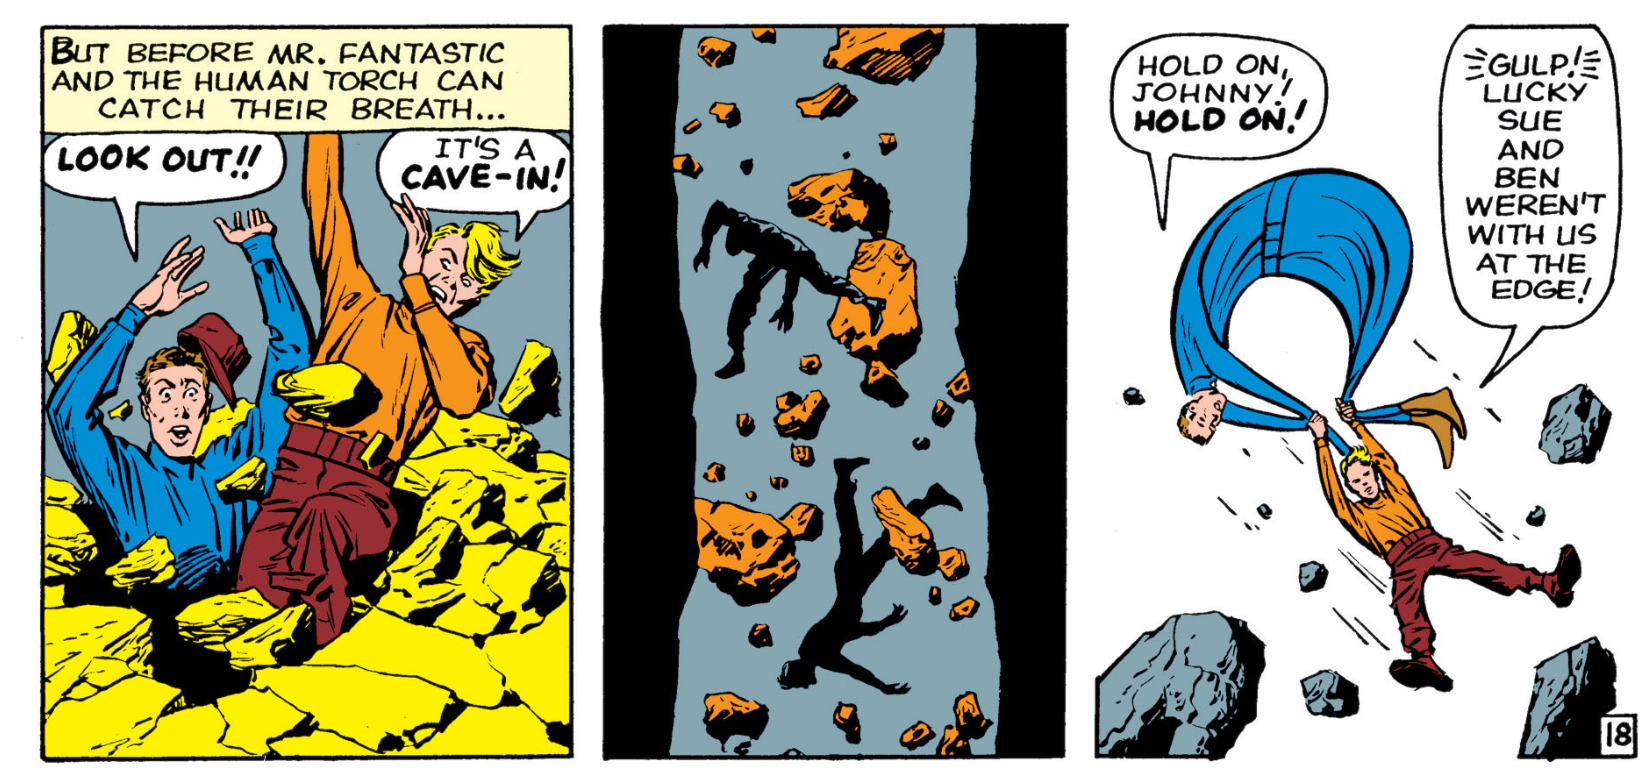 Johnny Storm and Reed Richards falling through a hole and Johnny using Reed as a parachute.